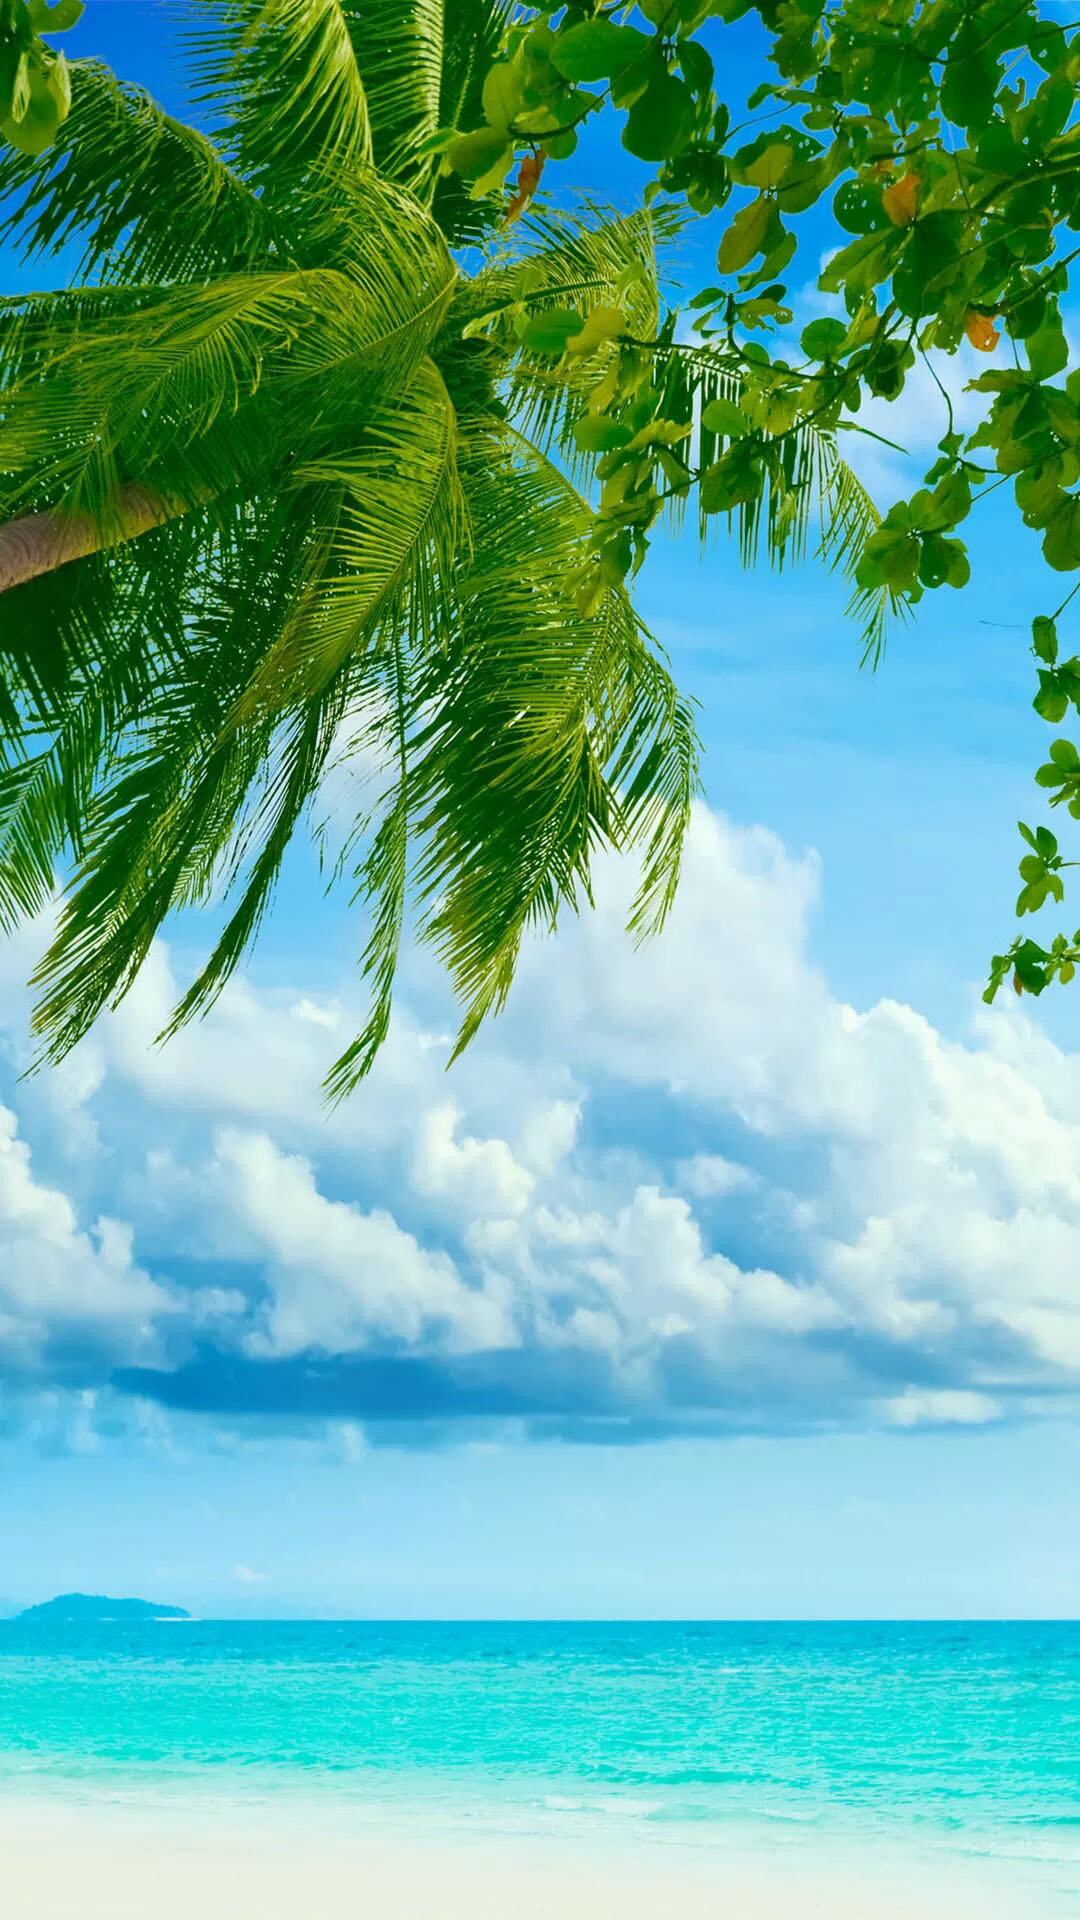 Tropical Beach Coconut Tree Android Wallpaper